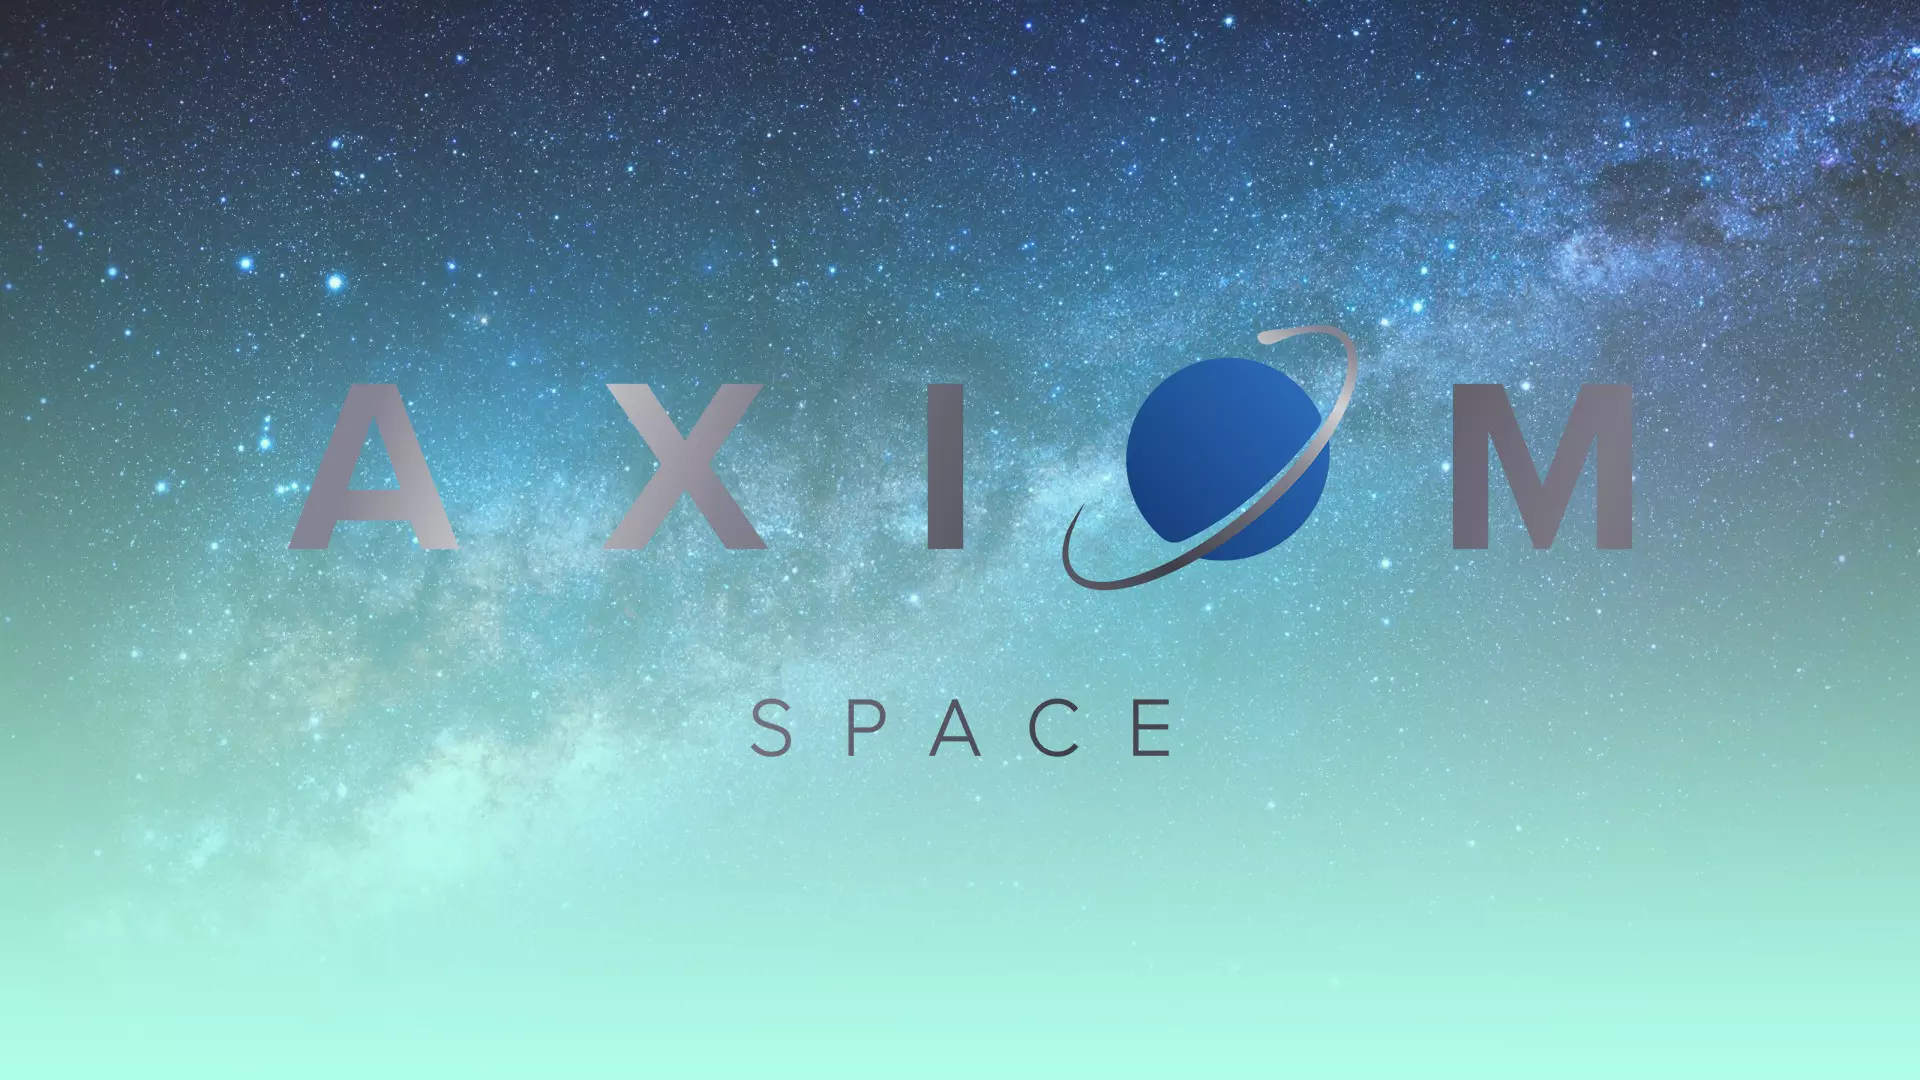 Axiom Space will build the first Artemis moonwalk spacesuits for NASA